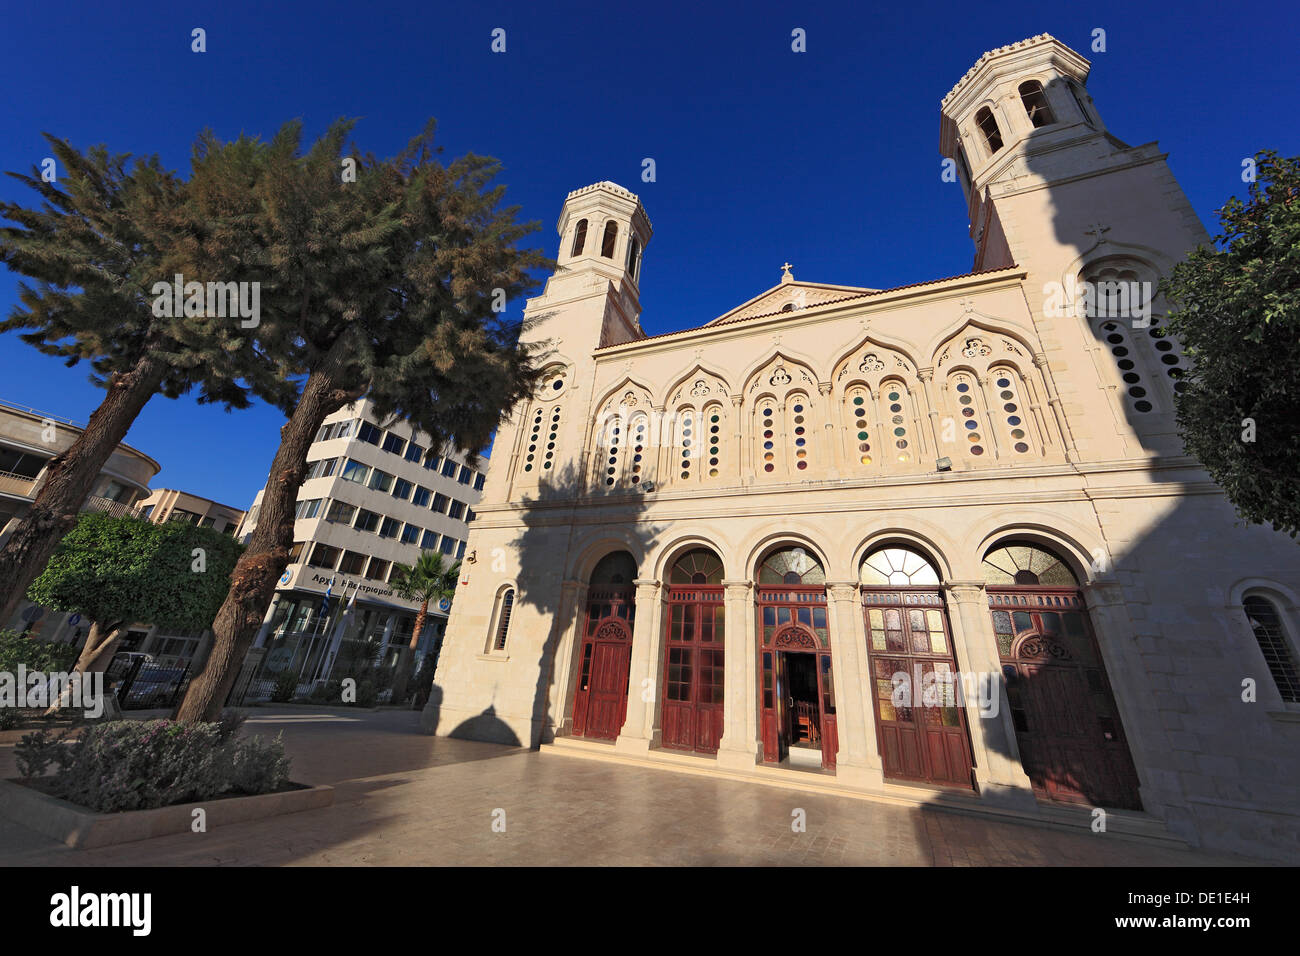 Cyprus, Limassol, Lemesos, Limassol, Agia Napa Cathedral in the Old Town Stock Photo